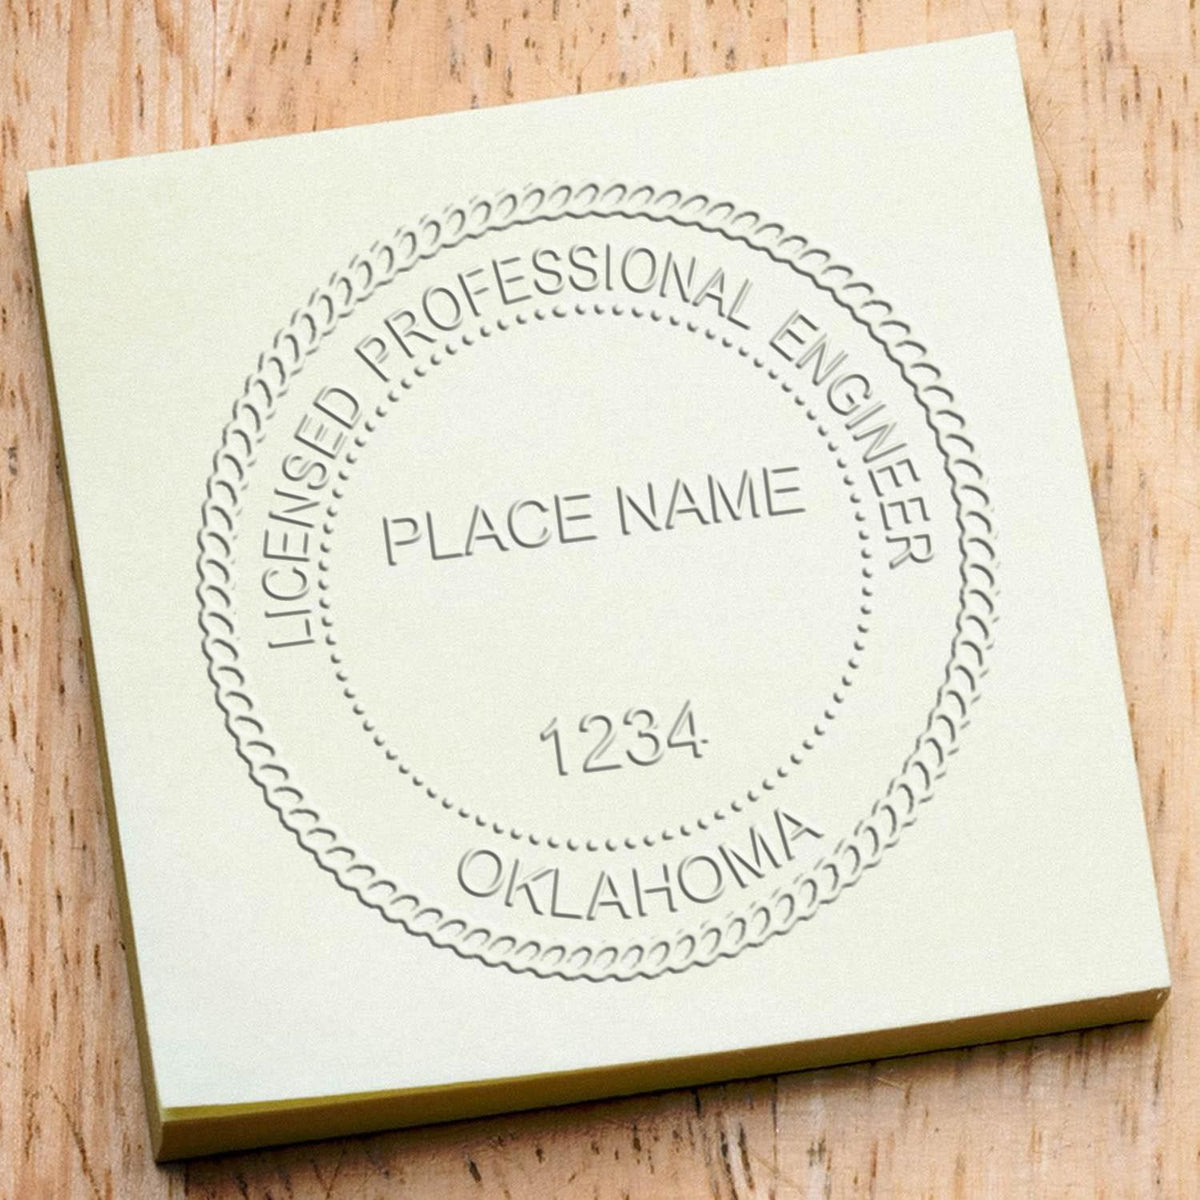 A stamped imprint of the Gift Oklahoma Engineer Seal in this stylish lifestyle photo, setting the tone for a unique and personalized product.